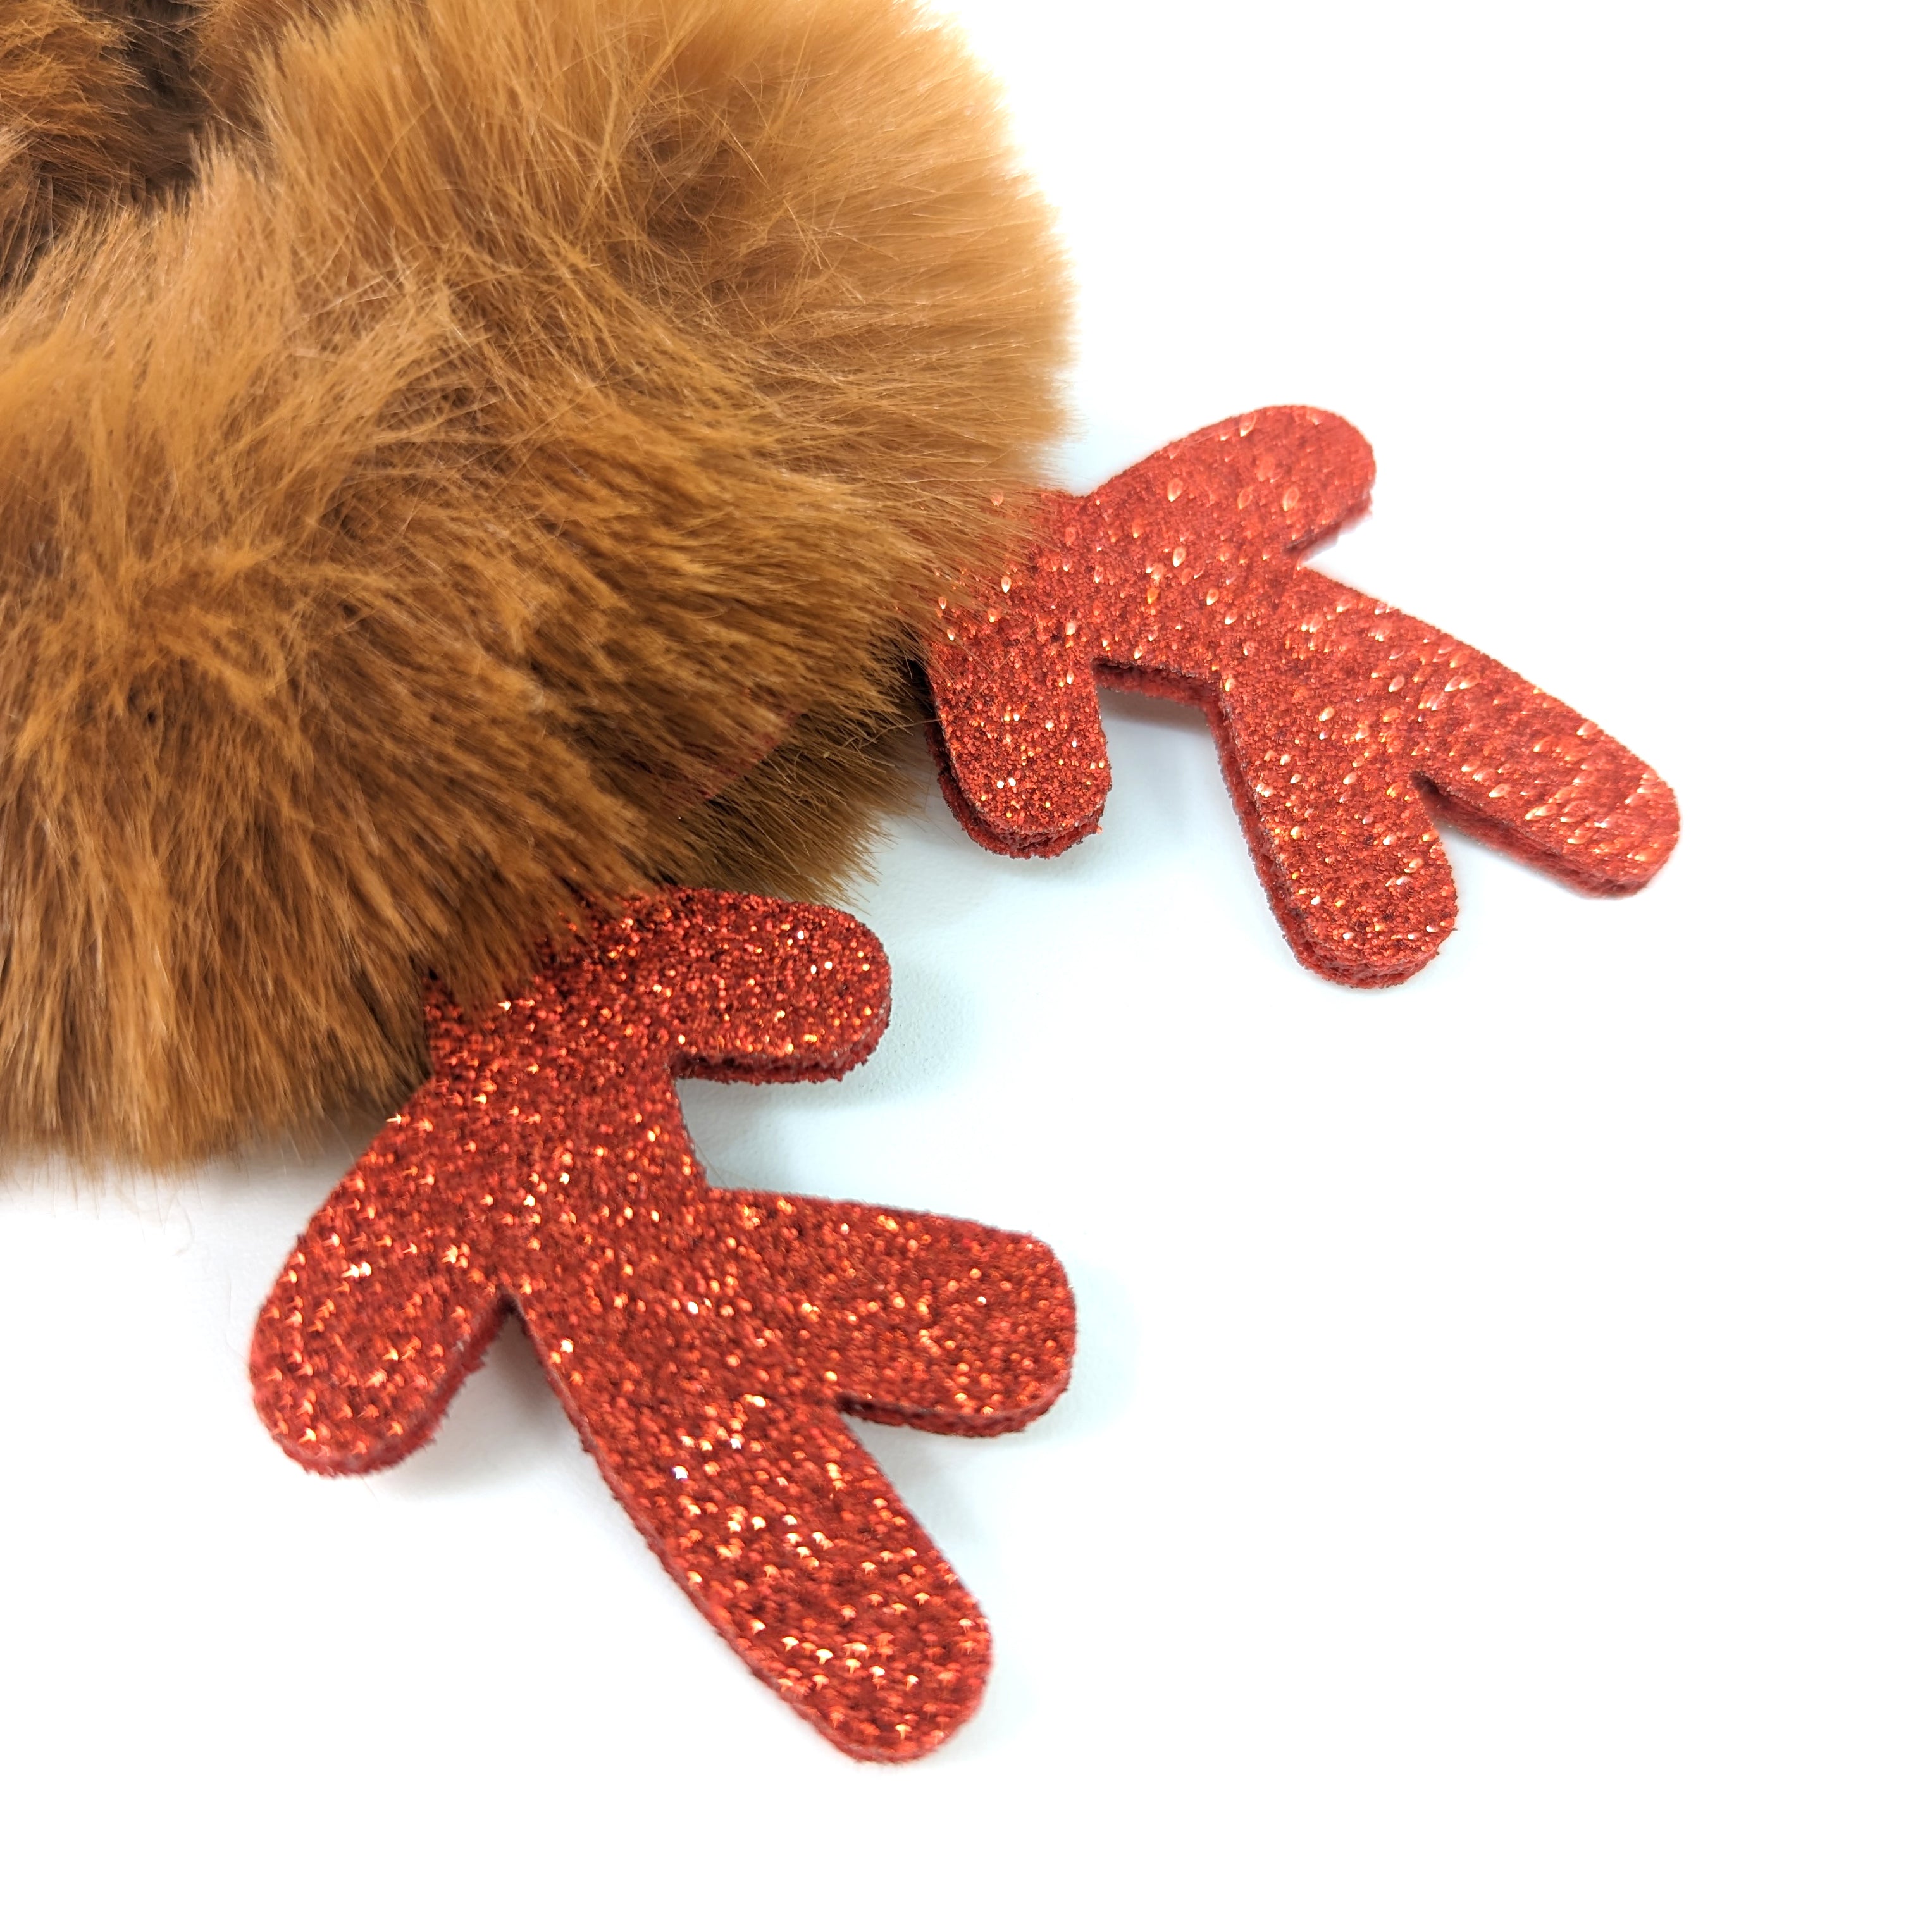 Natural Faux Fur Hairband with Sparkly Reindeer Antlers